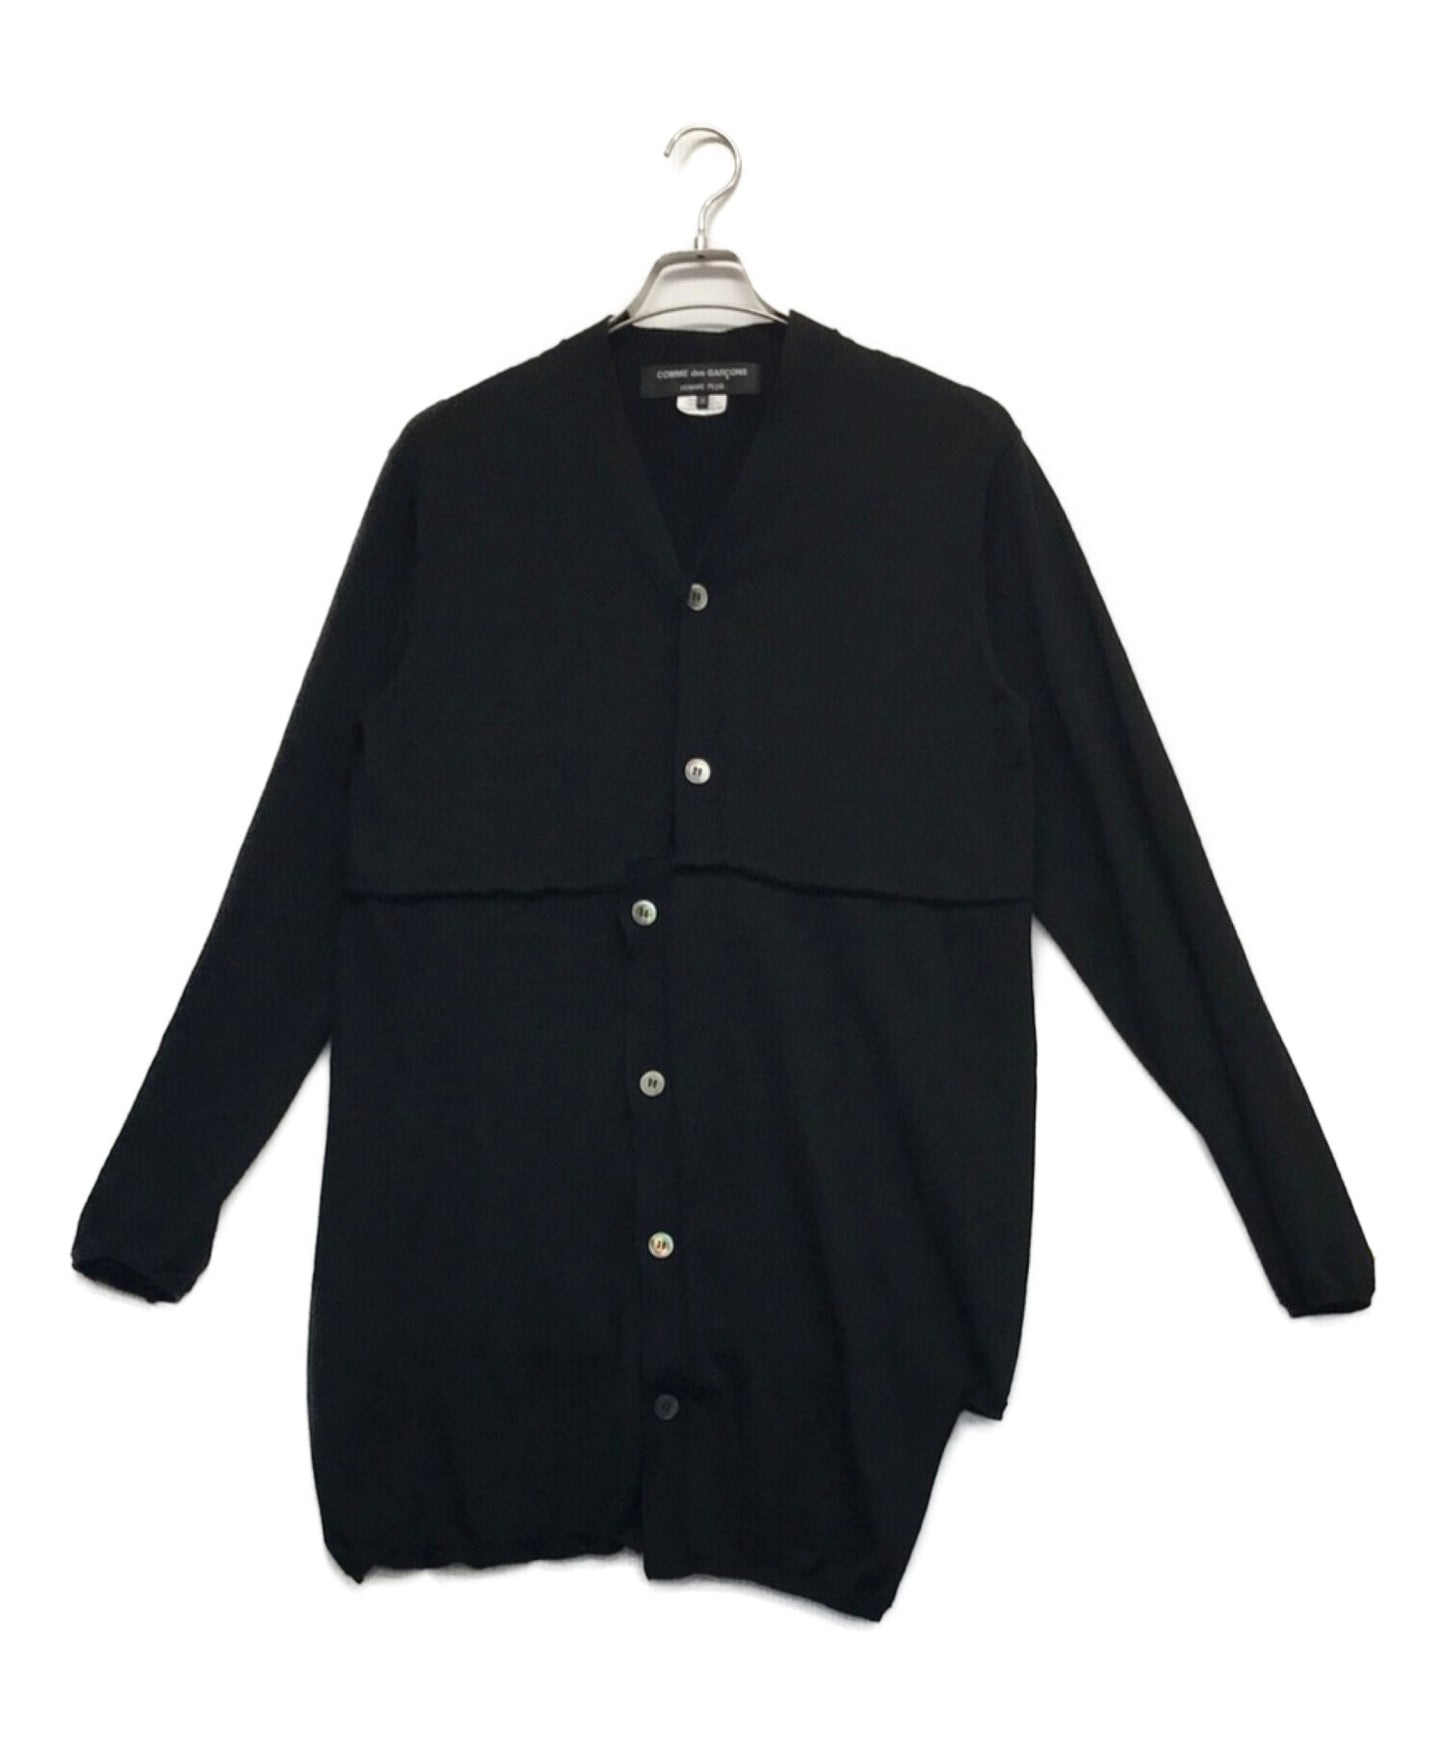 Comme des garcons homme plus cardigan cardigan twisted pf-n019